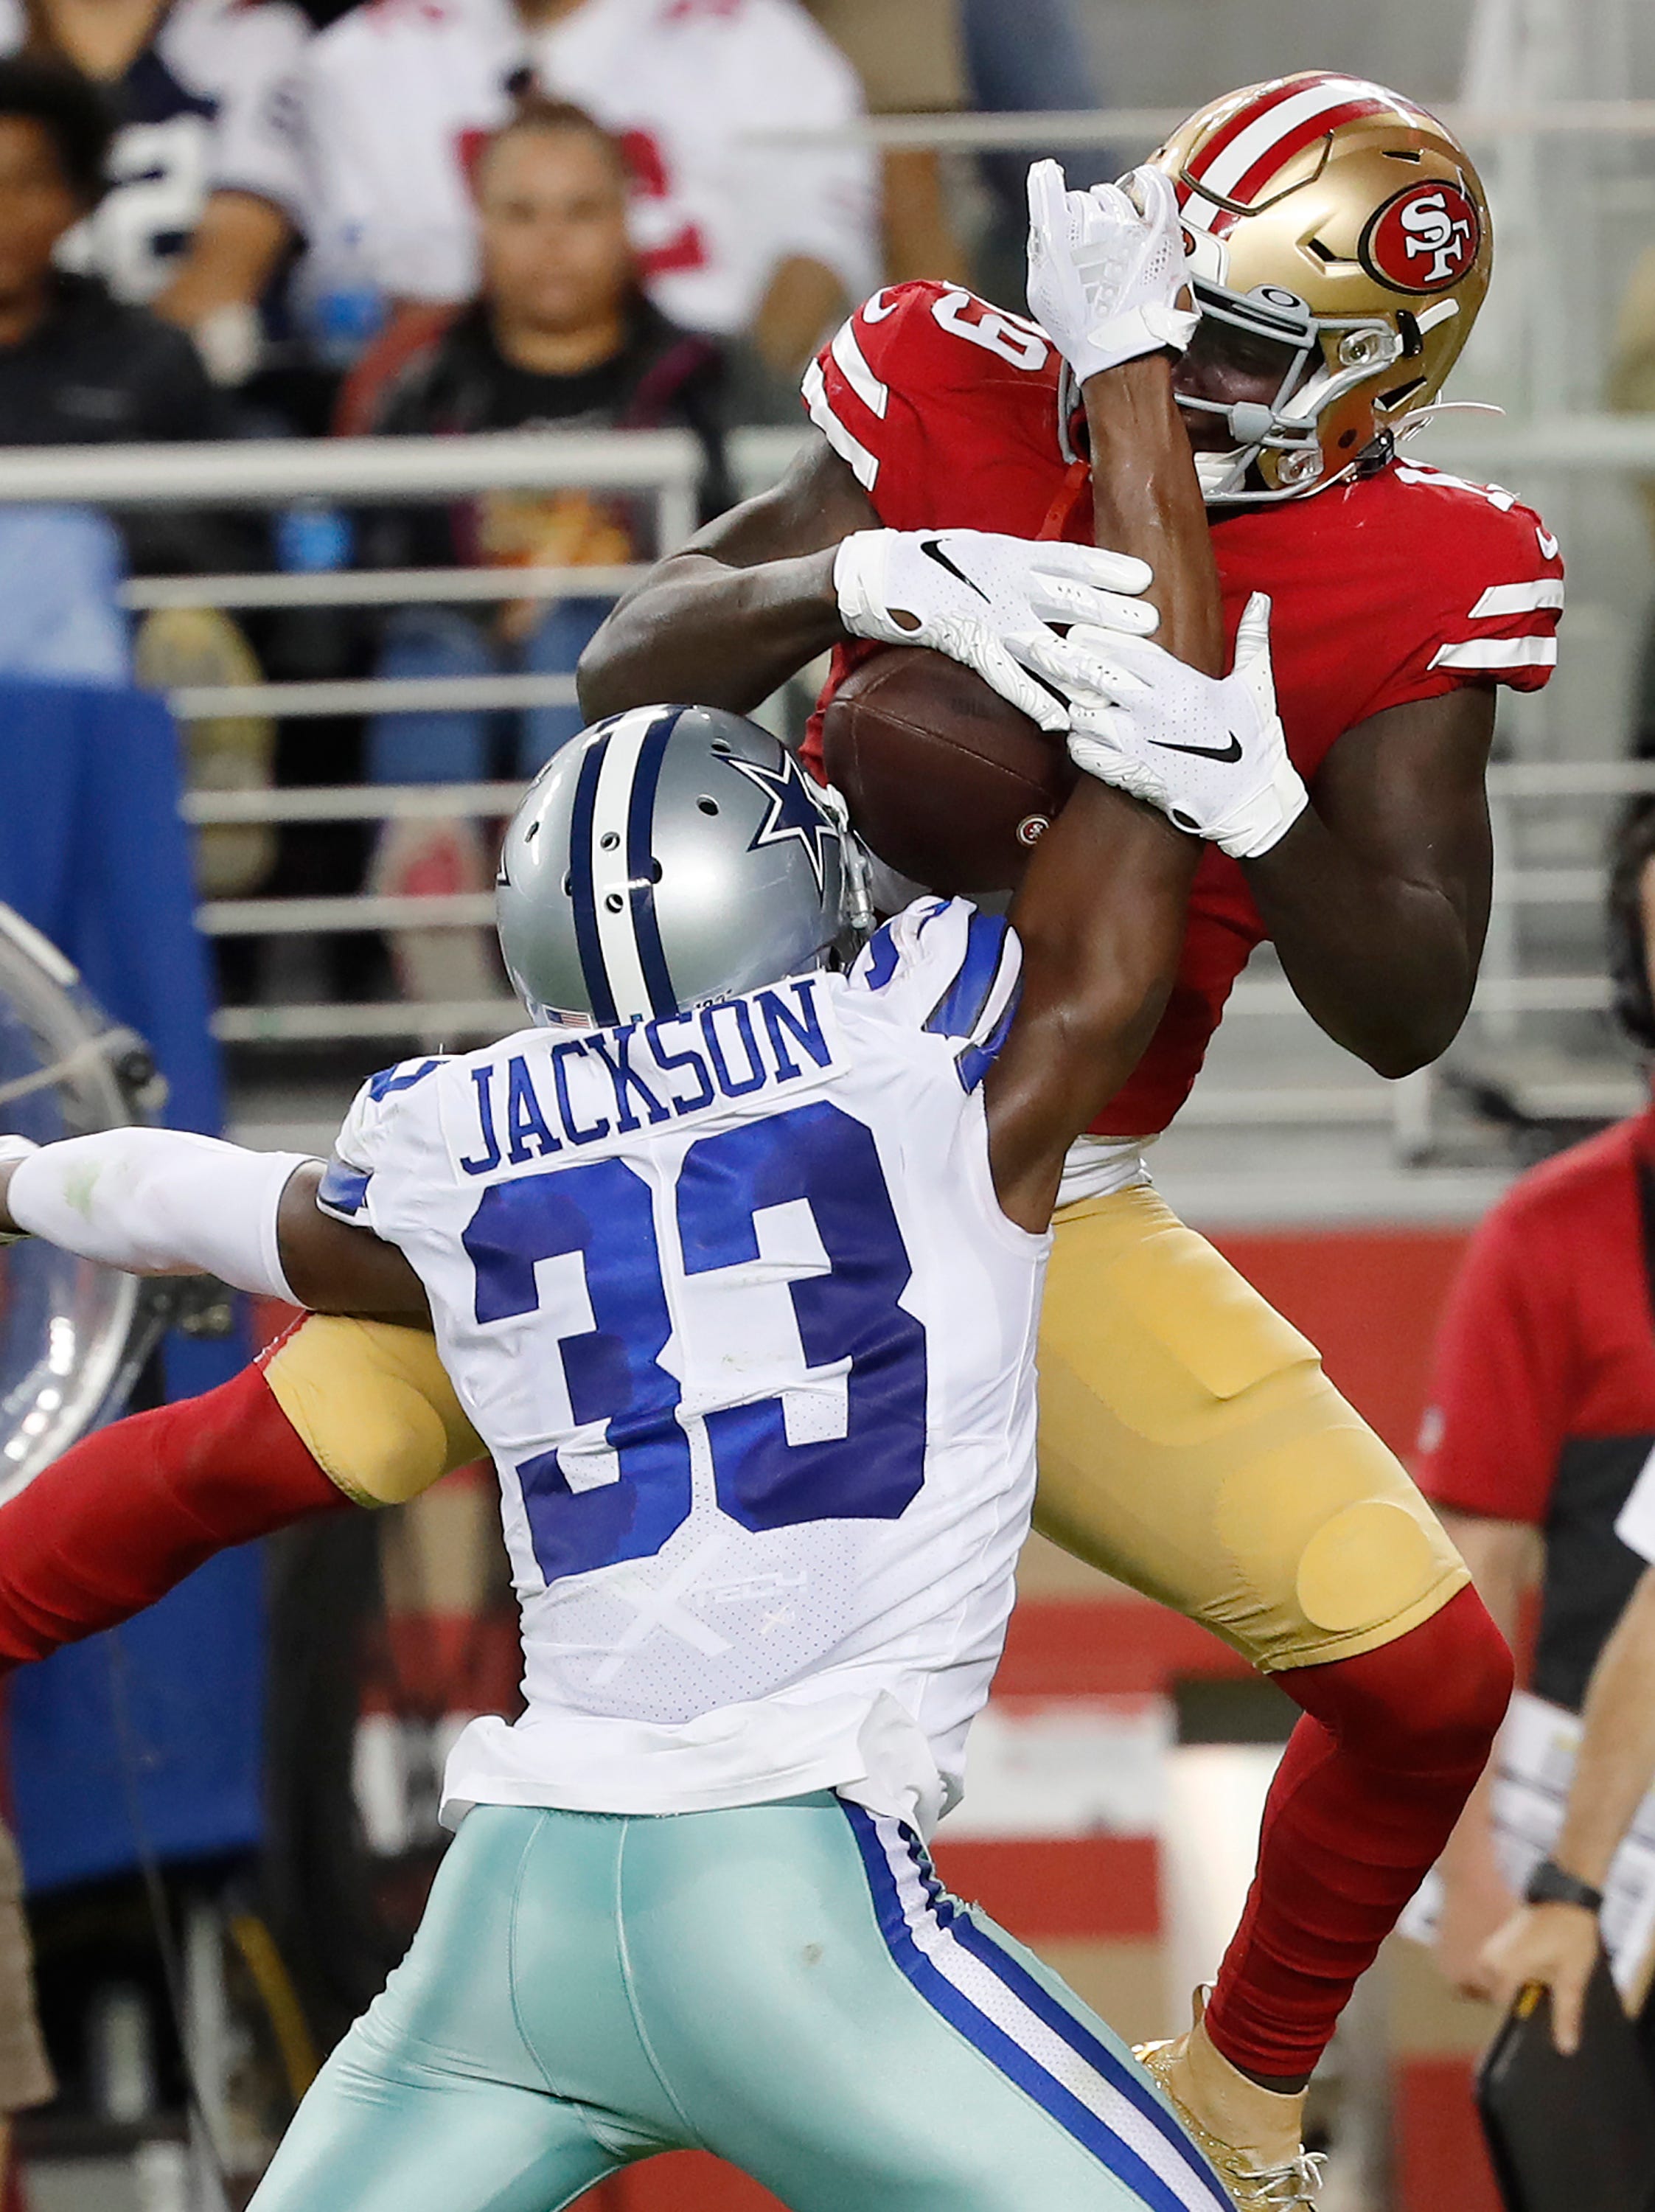 49ers rookie receivers show flashes in exhibition opener